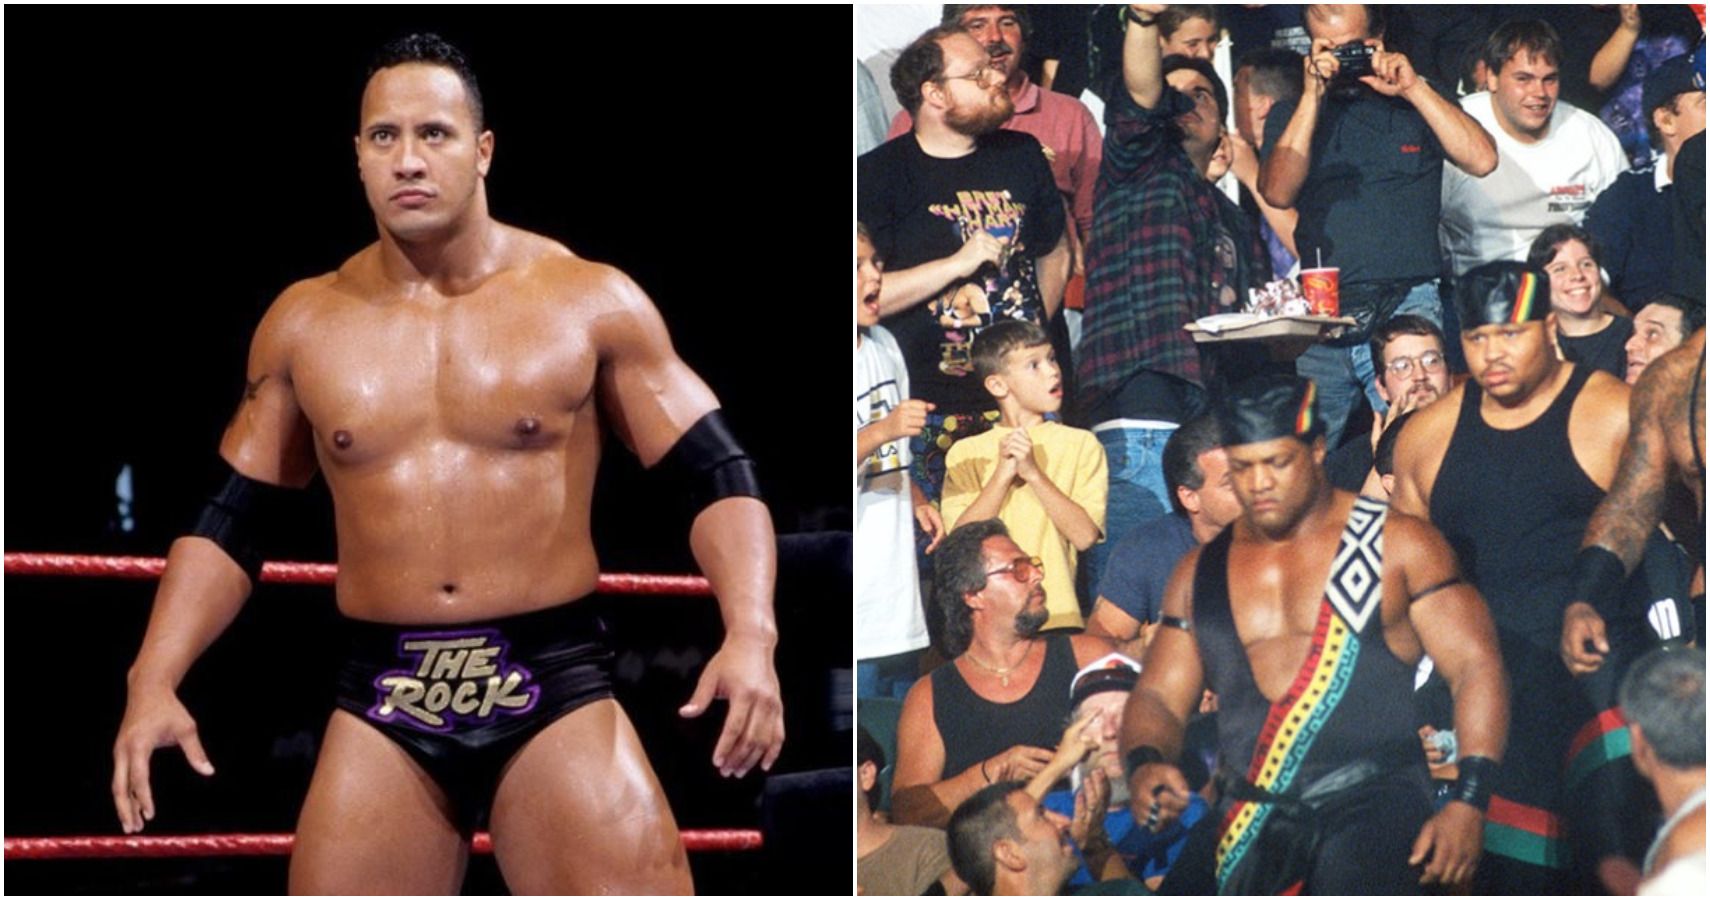 Nation of Domination: The Rock vs Faarooq